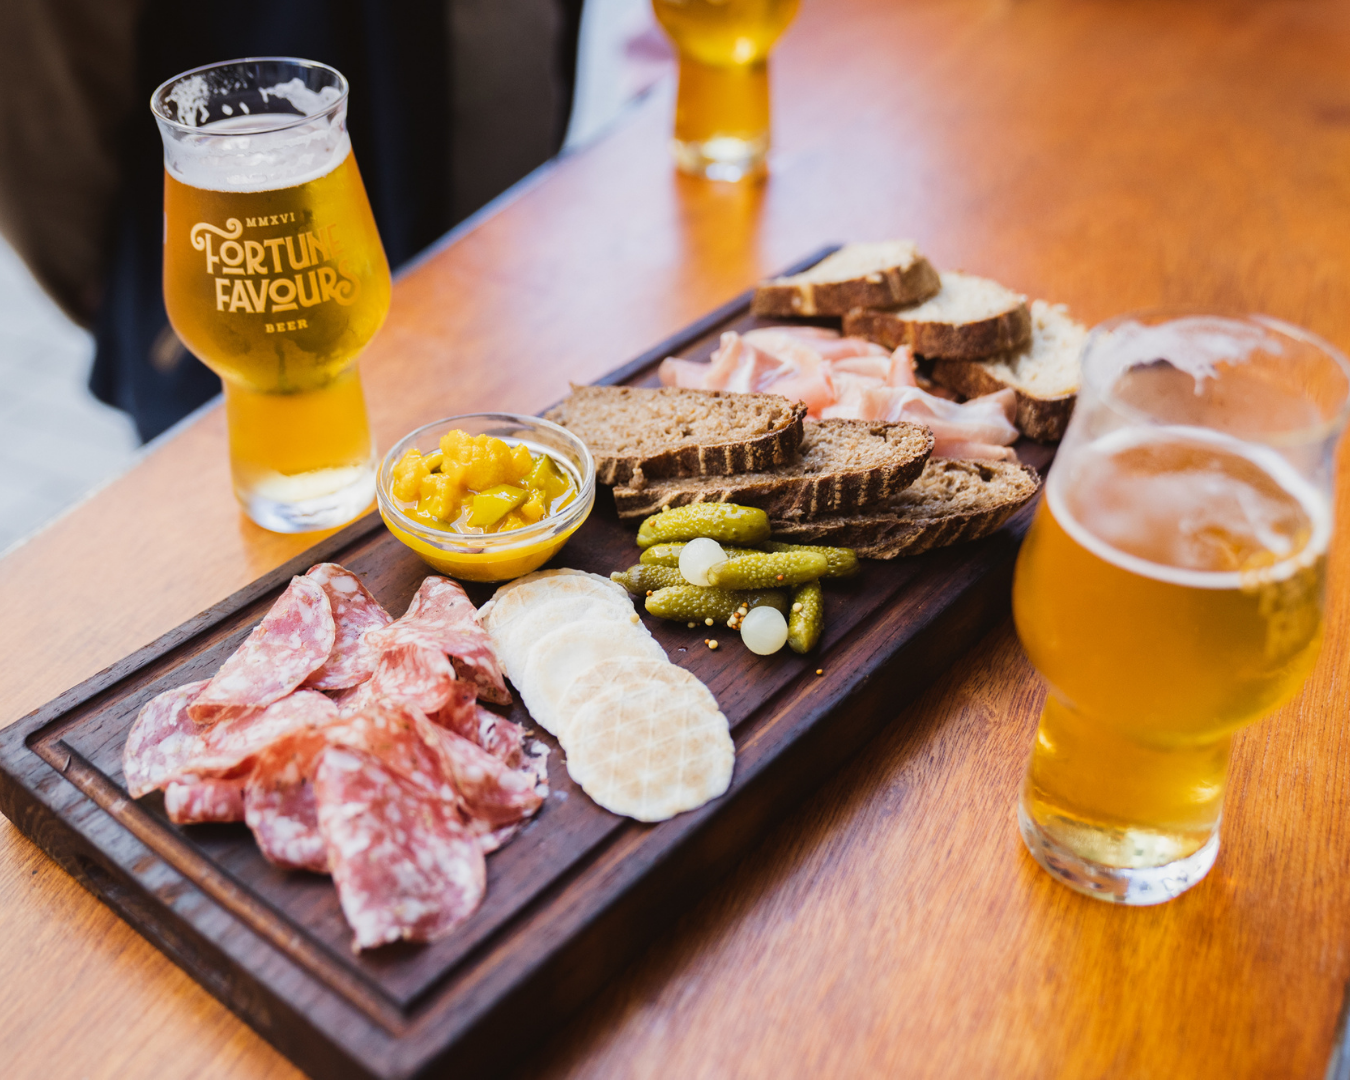 A beautiful graze board with cold cuts, bread and condiments alongside pints of fortune favour beers